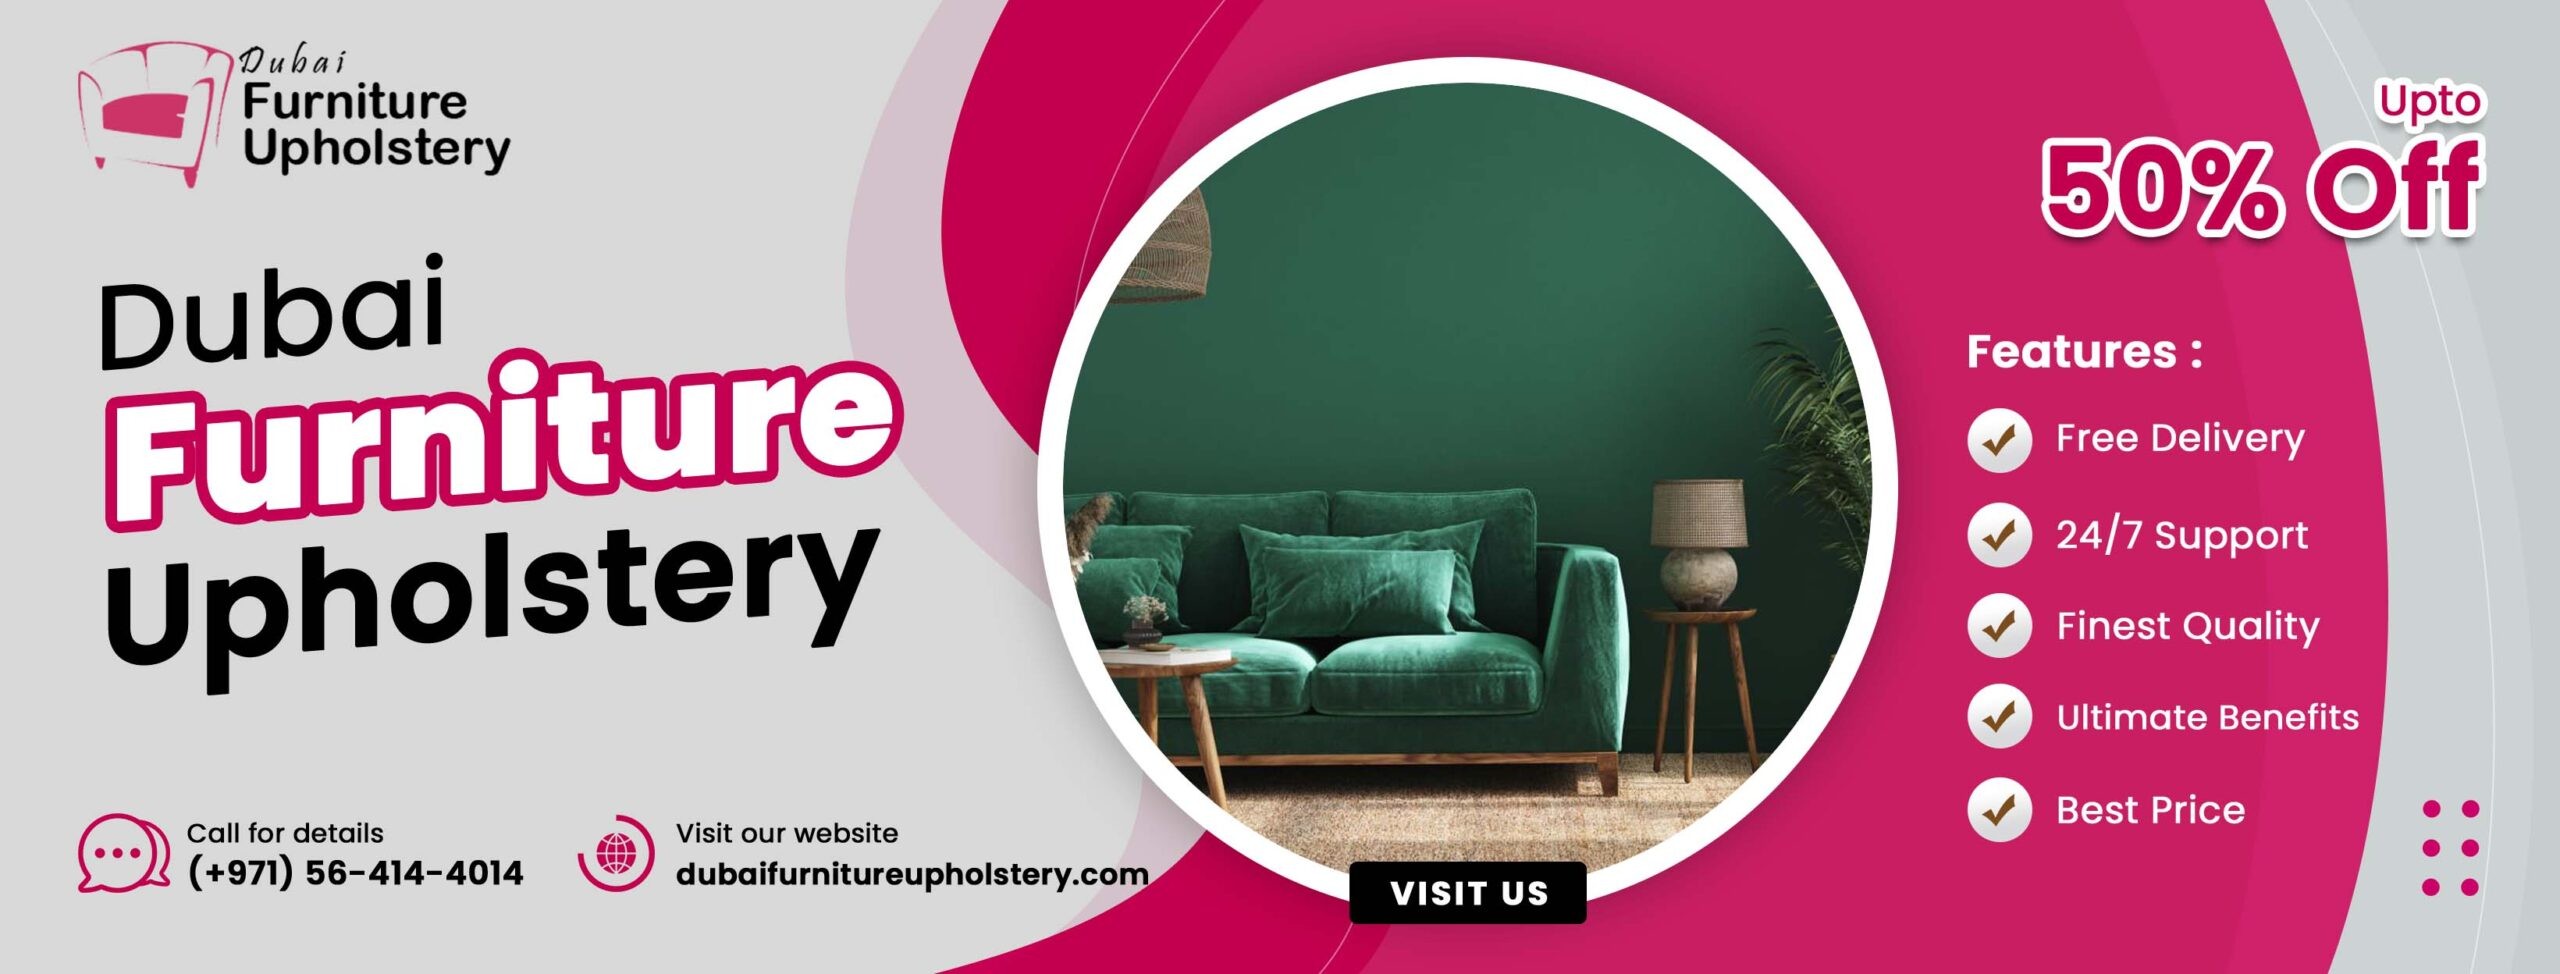 Dubai Furniture Upholstery Is Destination For Finest Quality Furniture